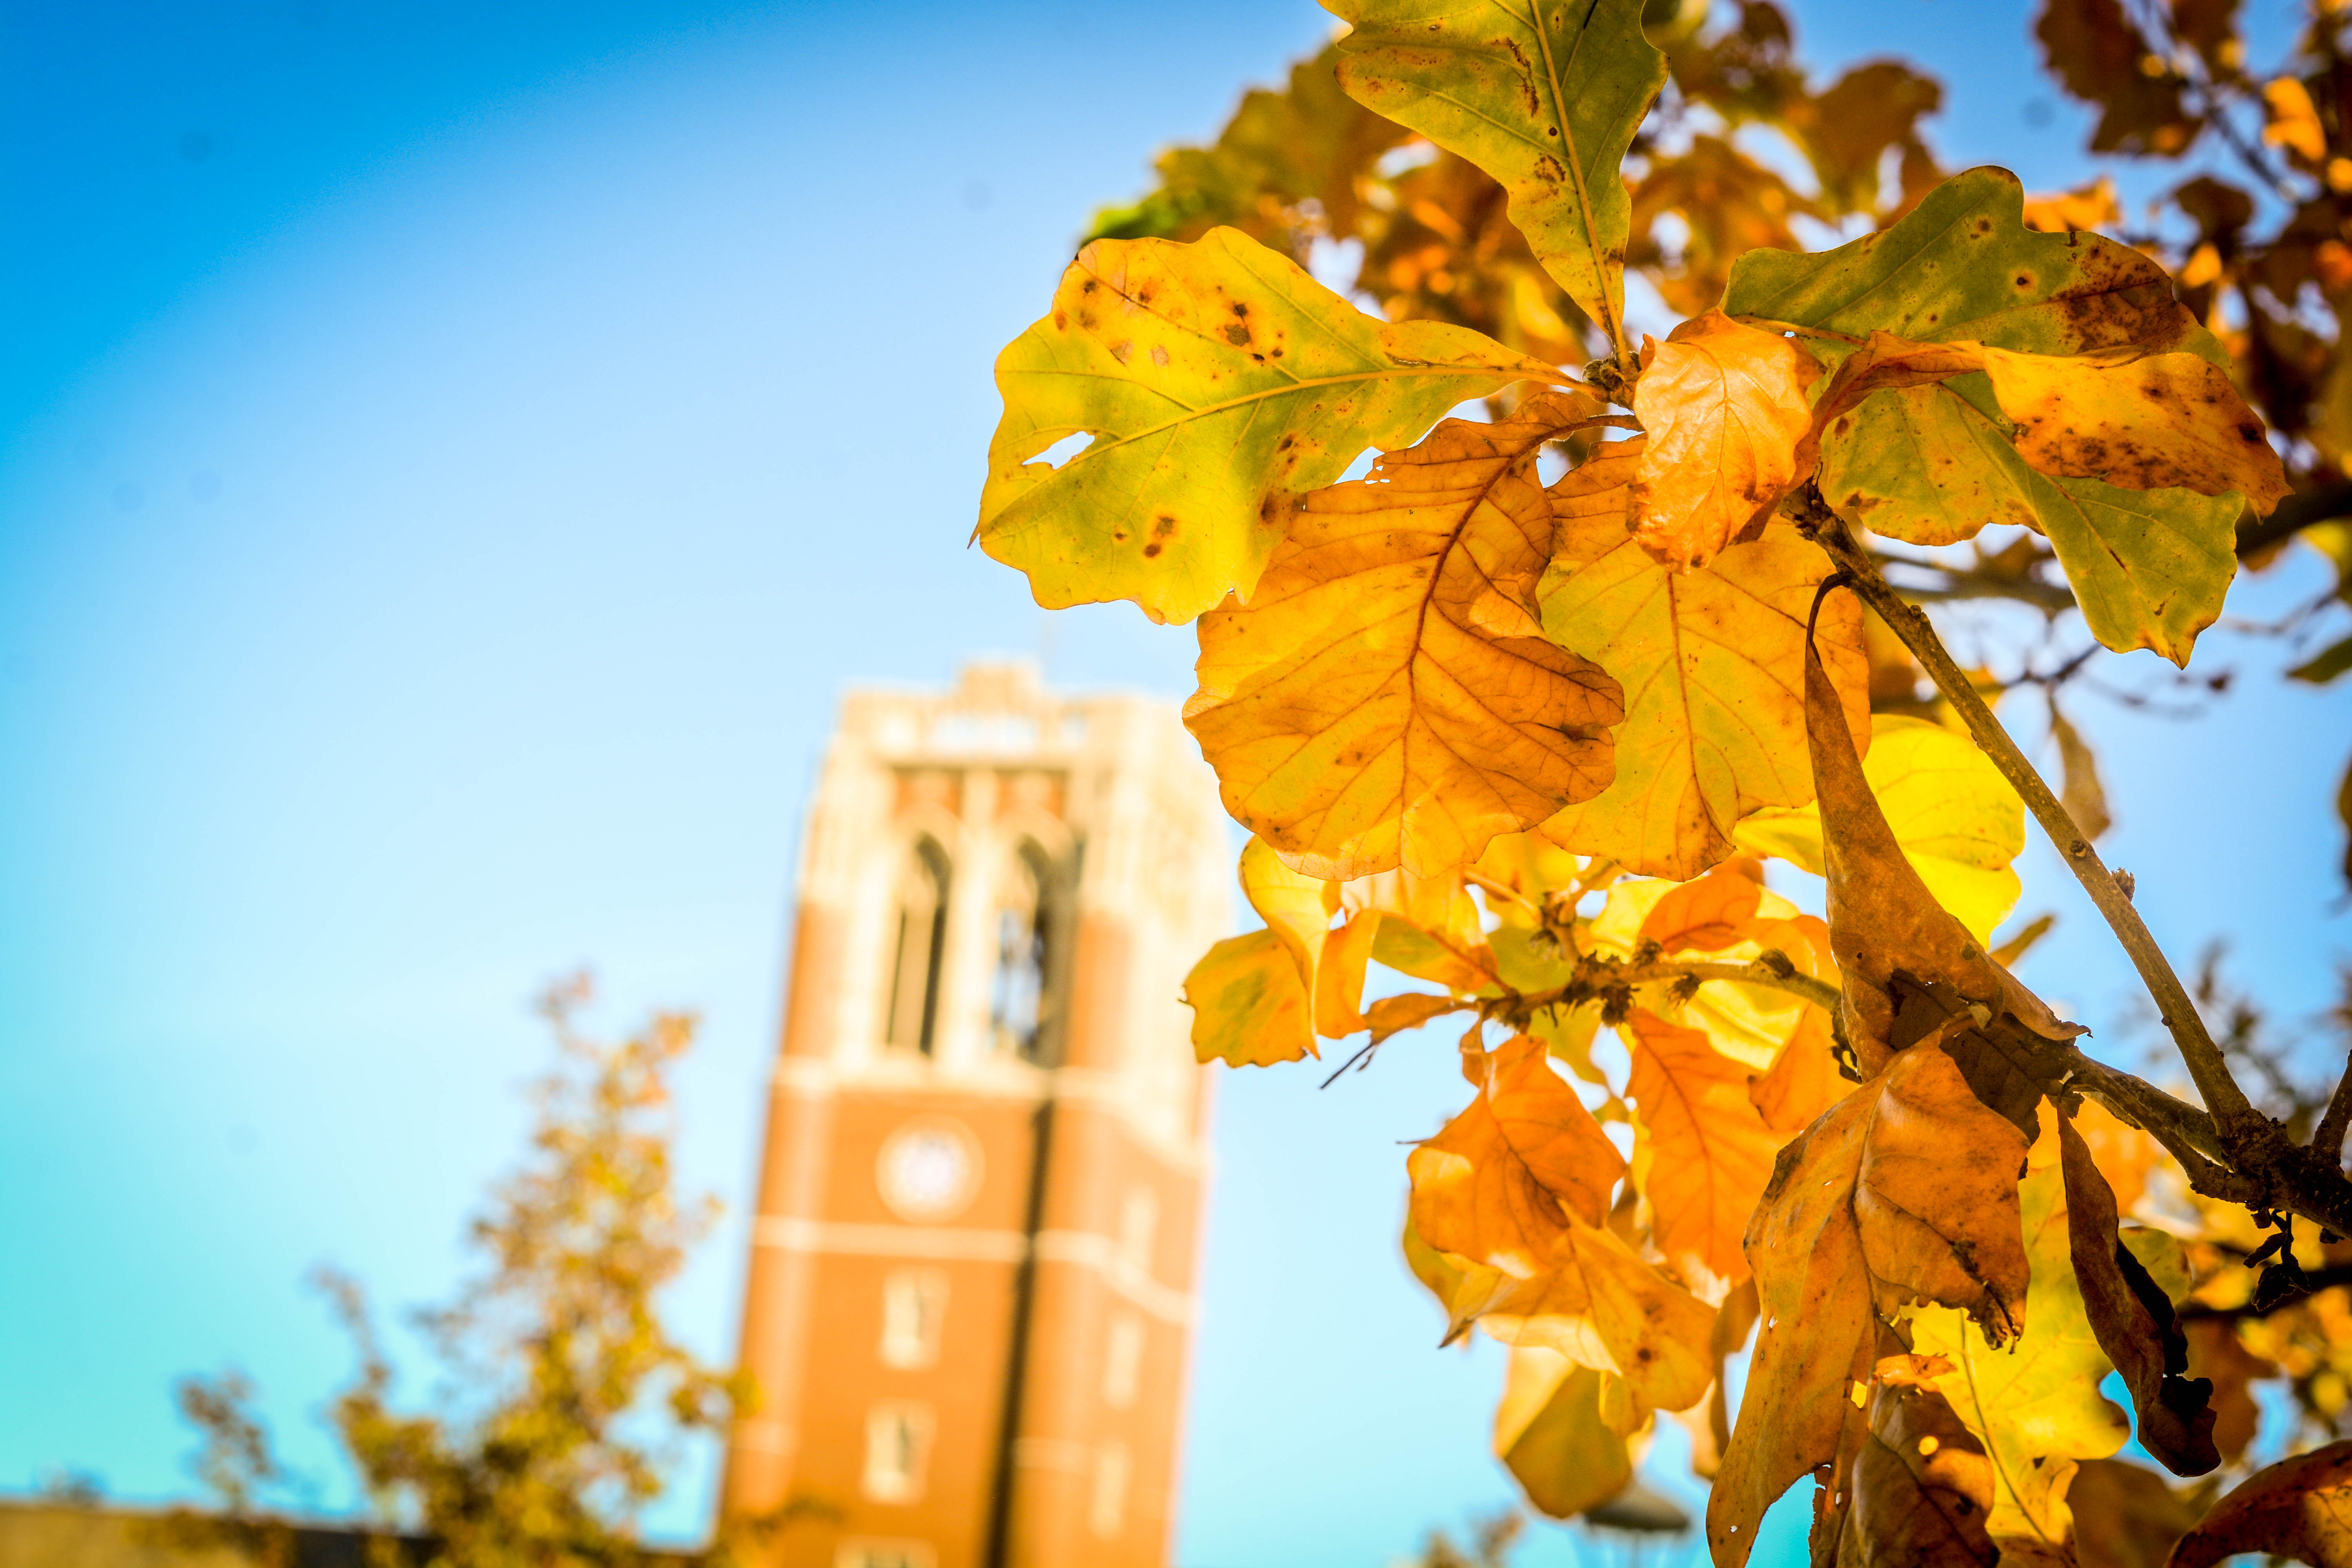 jcu clock tower in background of yellow leaf tree